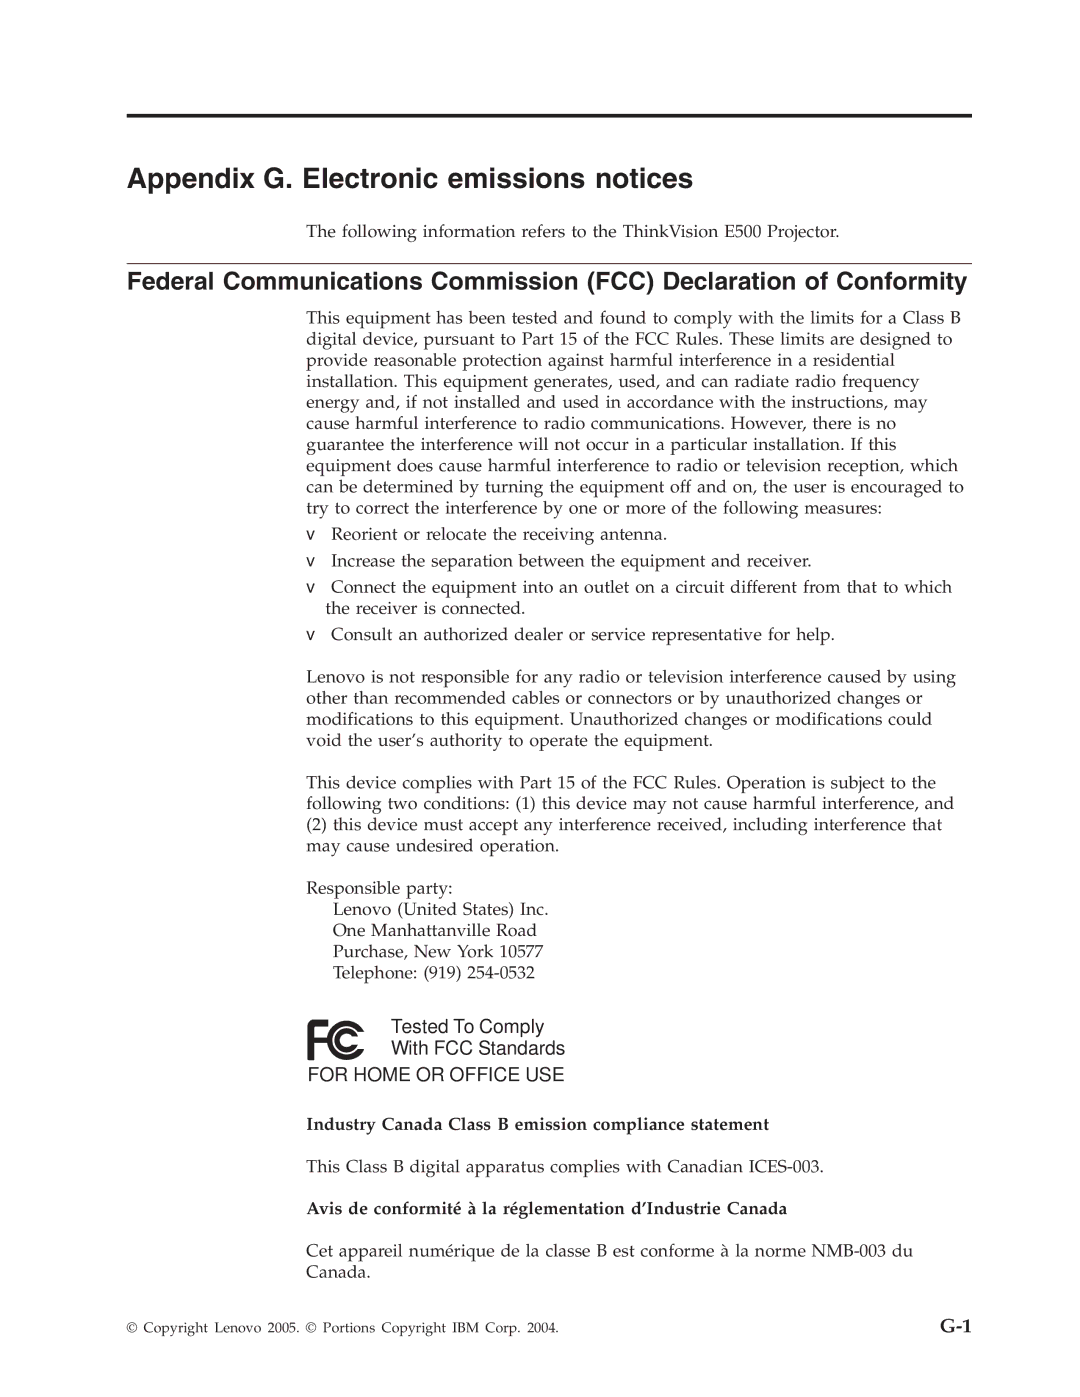 Lenovo E500 manual Appendix G. Electronic emissions notices, Industry Canada Class B emission compliance statement 